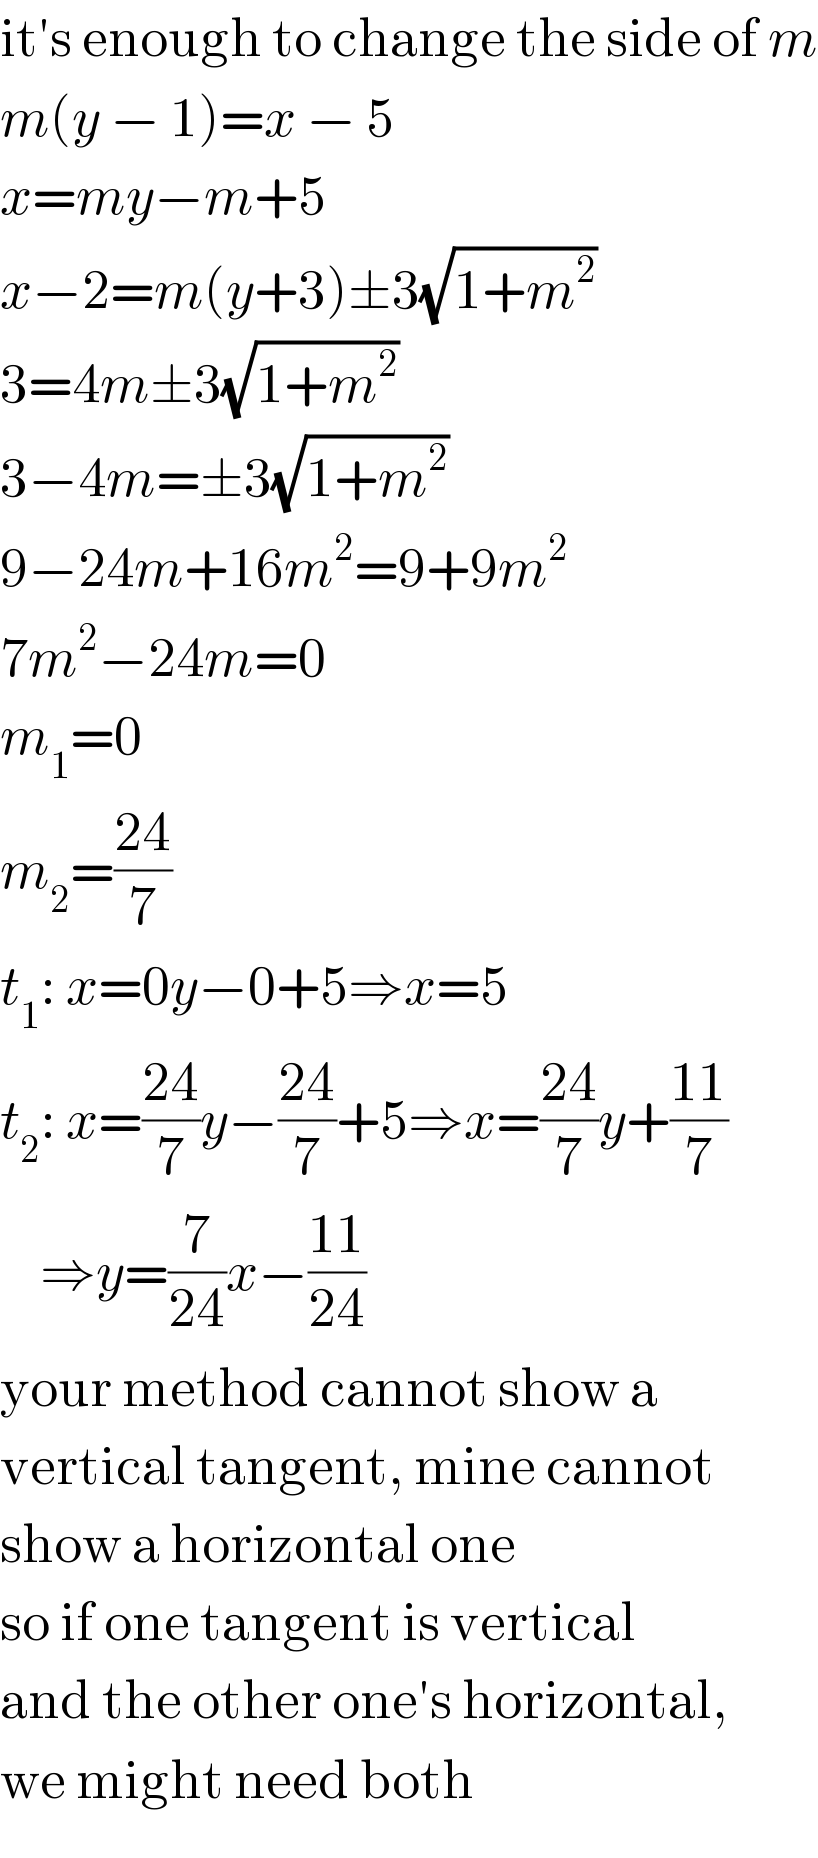 it′s enough to change the side of m  m(y − 1)=x − 5  x=my−m+5  x−2=m(y+3)±3(√(1+m^2 ))  3=4m±3(√(1+m^2 ))  3−4m=±3(√(1+m^2 ))  9−24m+16m^2 =9+9m^2   7m^2 −24m=0  m_1 =0  m_2 =((24)/7)  t_1 : x=0y−0+5⇒x=5  t_2 : x=((24)/7)y−((24)/7)+5⇒x=((24)/7)y+((11)/7)      ⇒y=(7/(24))x−((11)/(24))  your method cannot show a  vertical tangent, mine cannot  show a horizontal one  so if one tangent is vertical  and the other one′s horizontal,  we might need both  